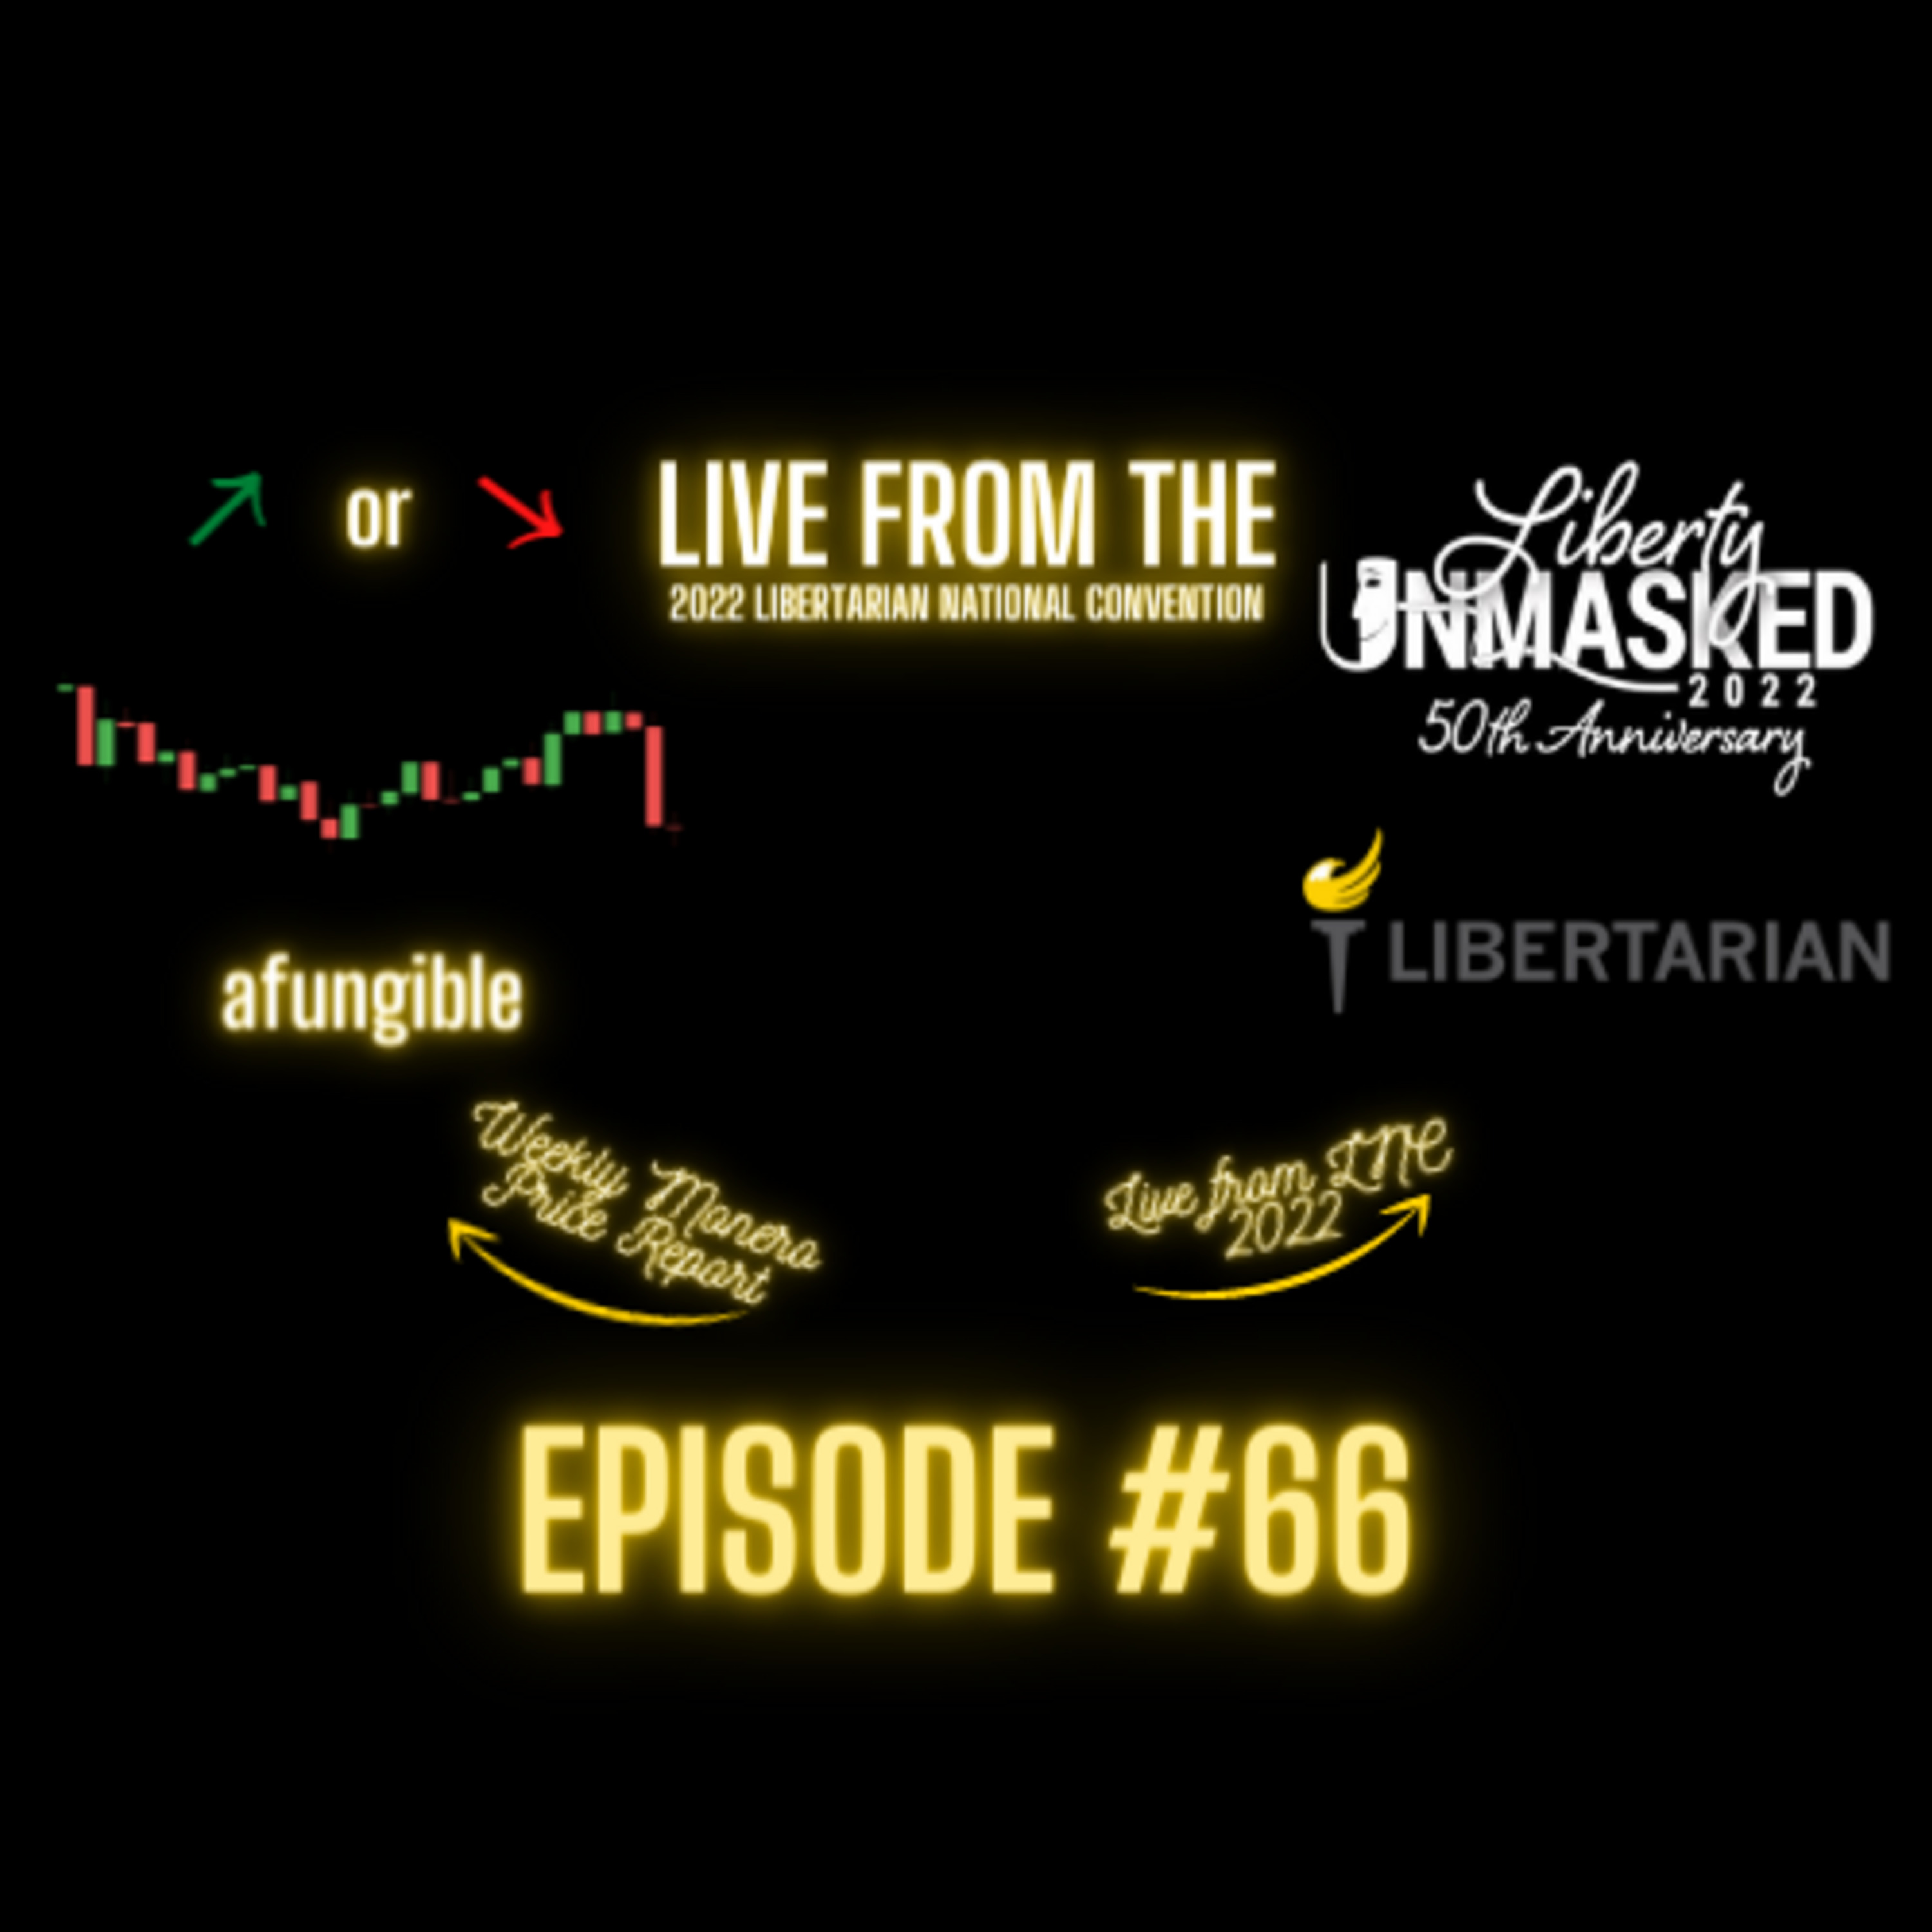 LIVE at the 2022 Libertarian National Convention in Reno, Nevada! Epi #66